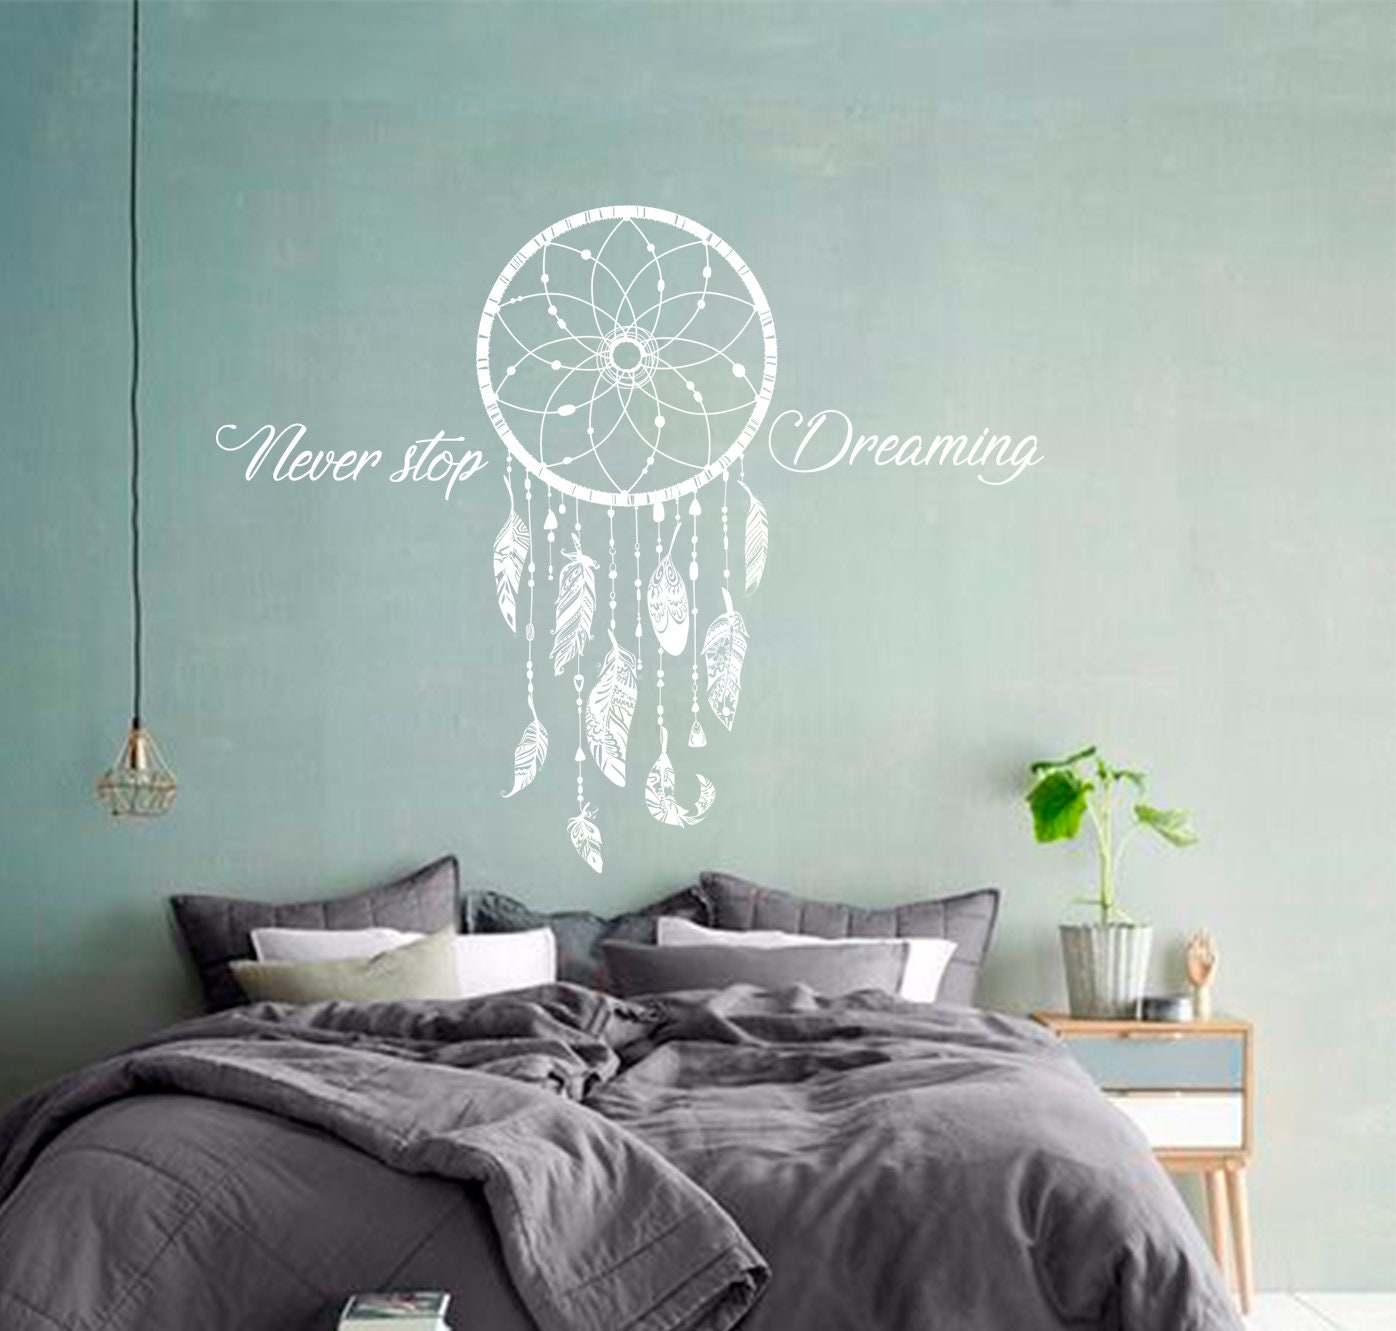 Buy Dream Catcher Wall Decal, Boho Dream Catcher Decal, Bedroom Wall Decal,  Mandala Sticker Online in India 